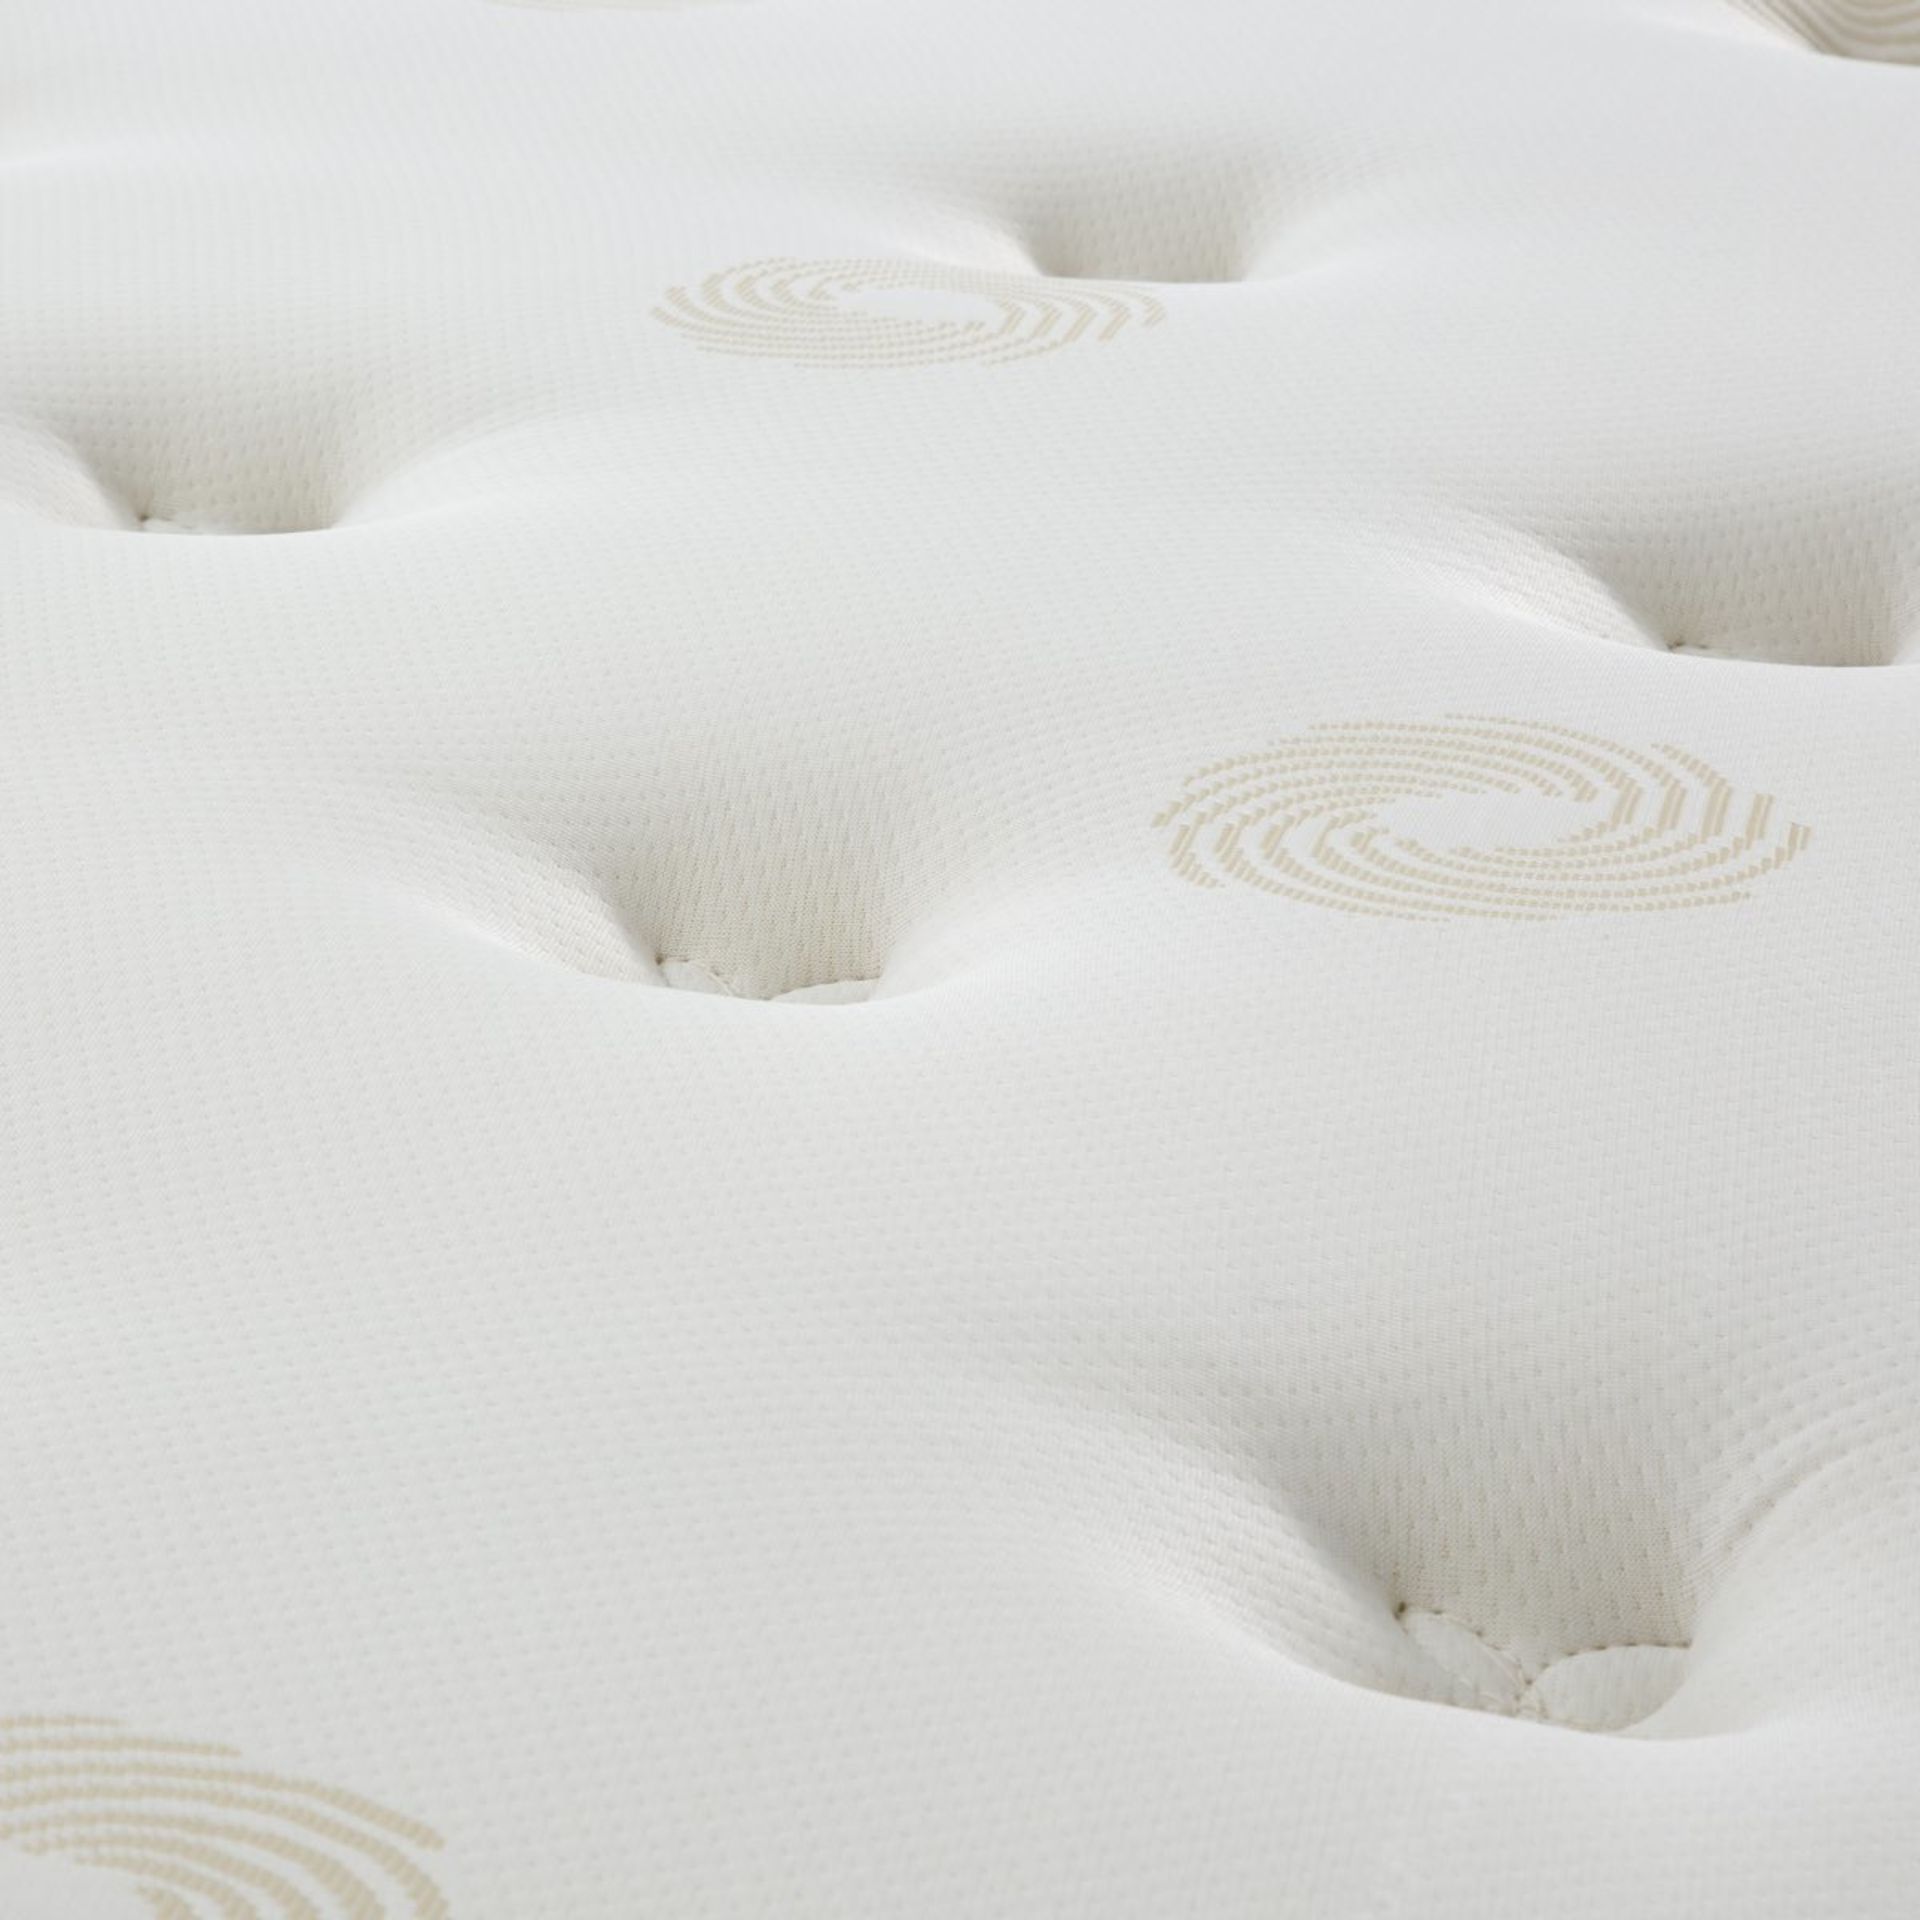 1 x King Size Open Coil Mattress With Memory Foam - Firmness: Medium-soft - Dimensions: 150 x 23 x - Image 3 of 6